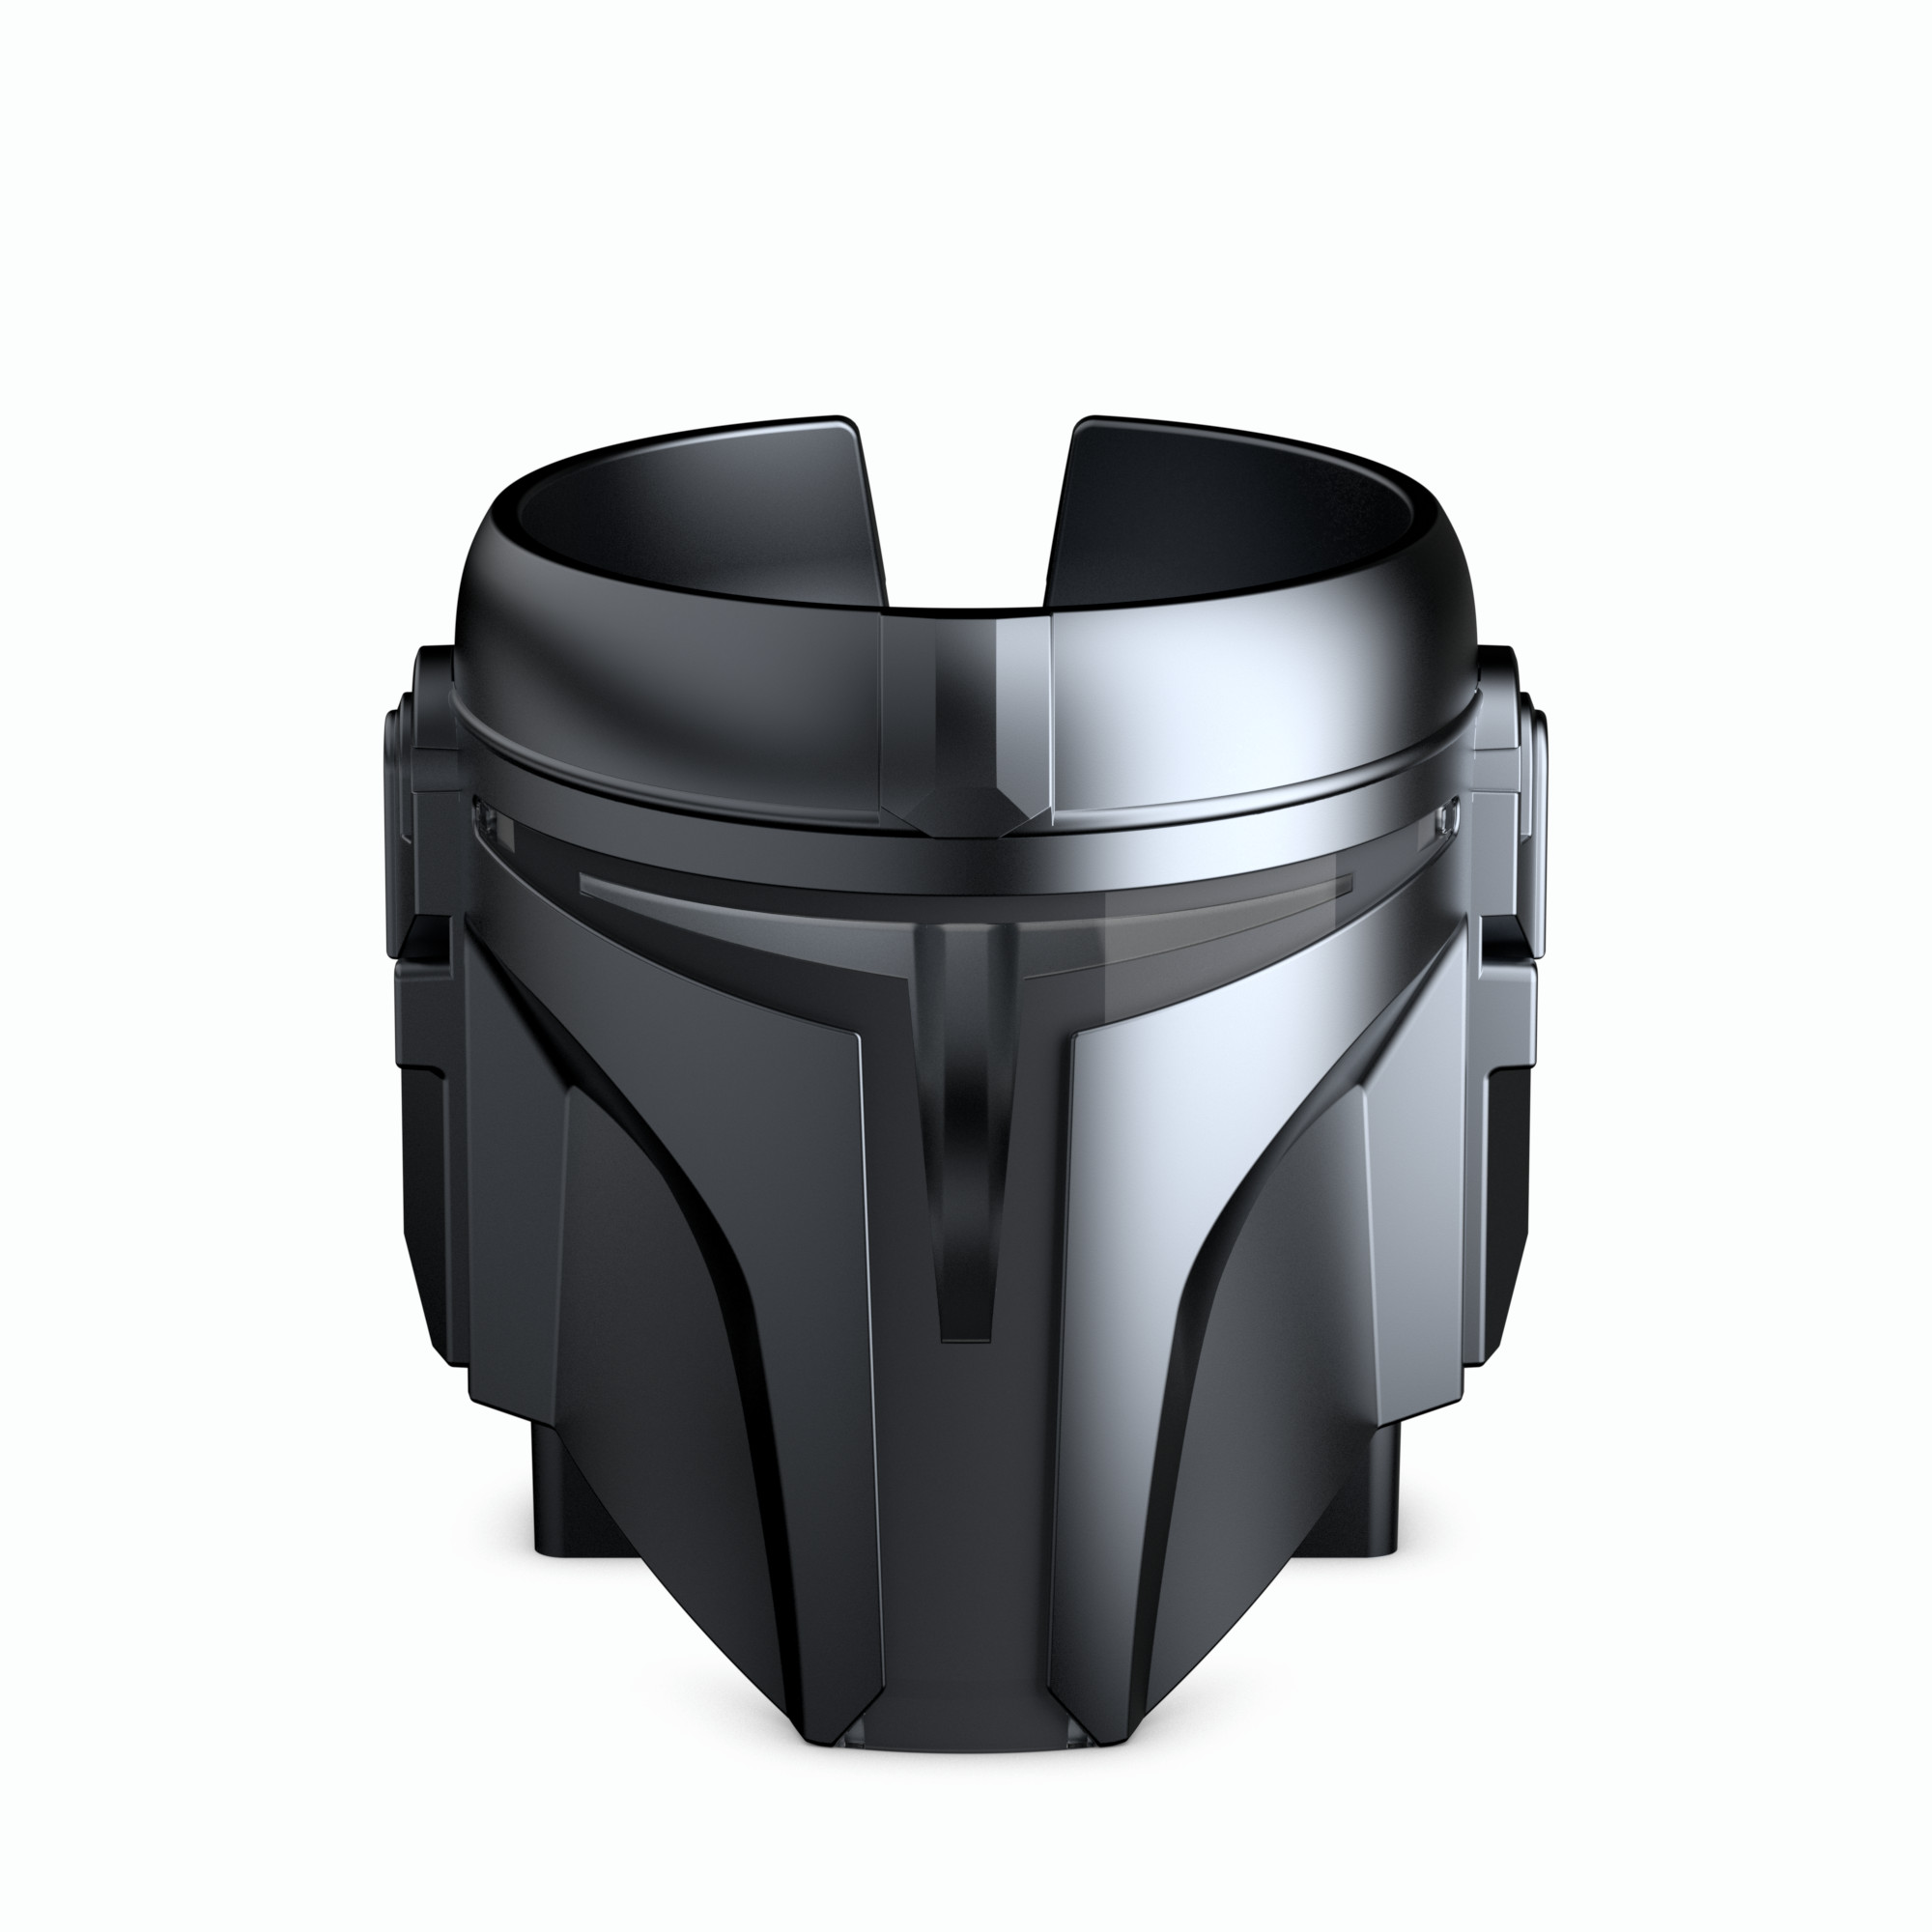 Product render of Mando Helmet. Lighting, compositing, and material creation were made in Cinema4D